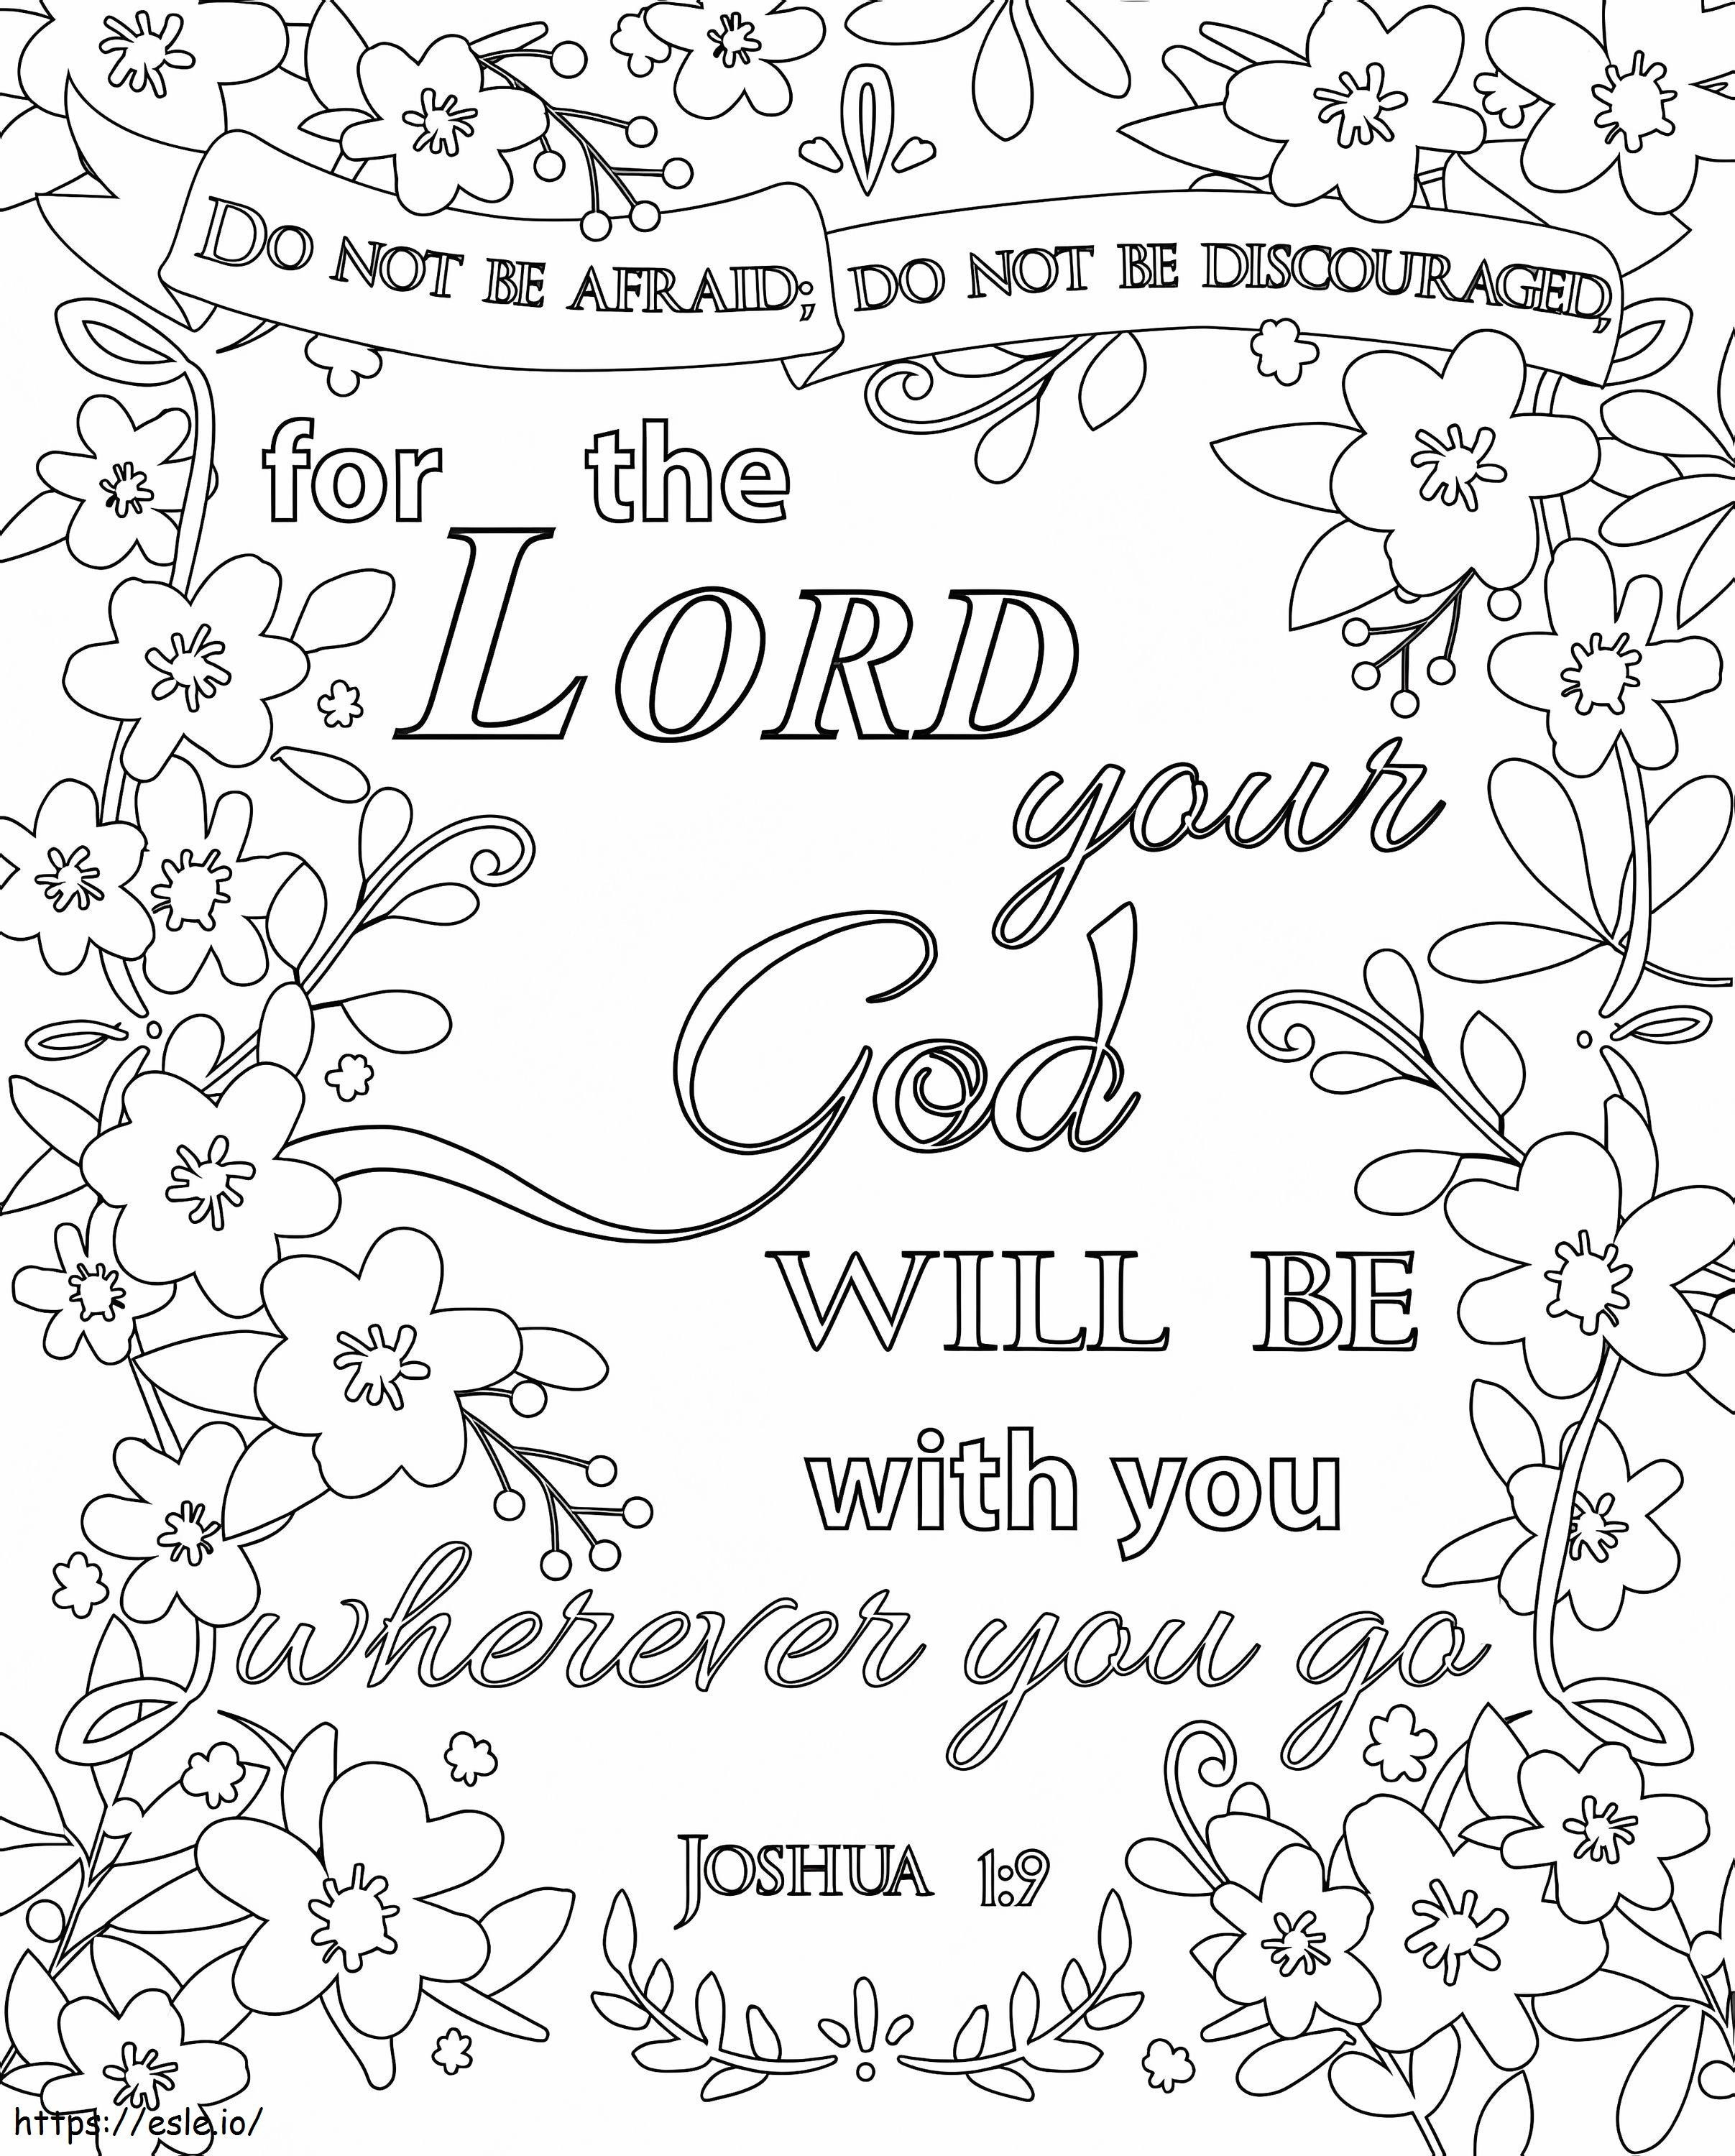 Bible Verse 8 coloring page